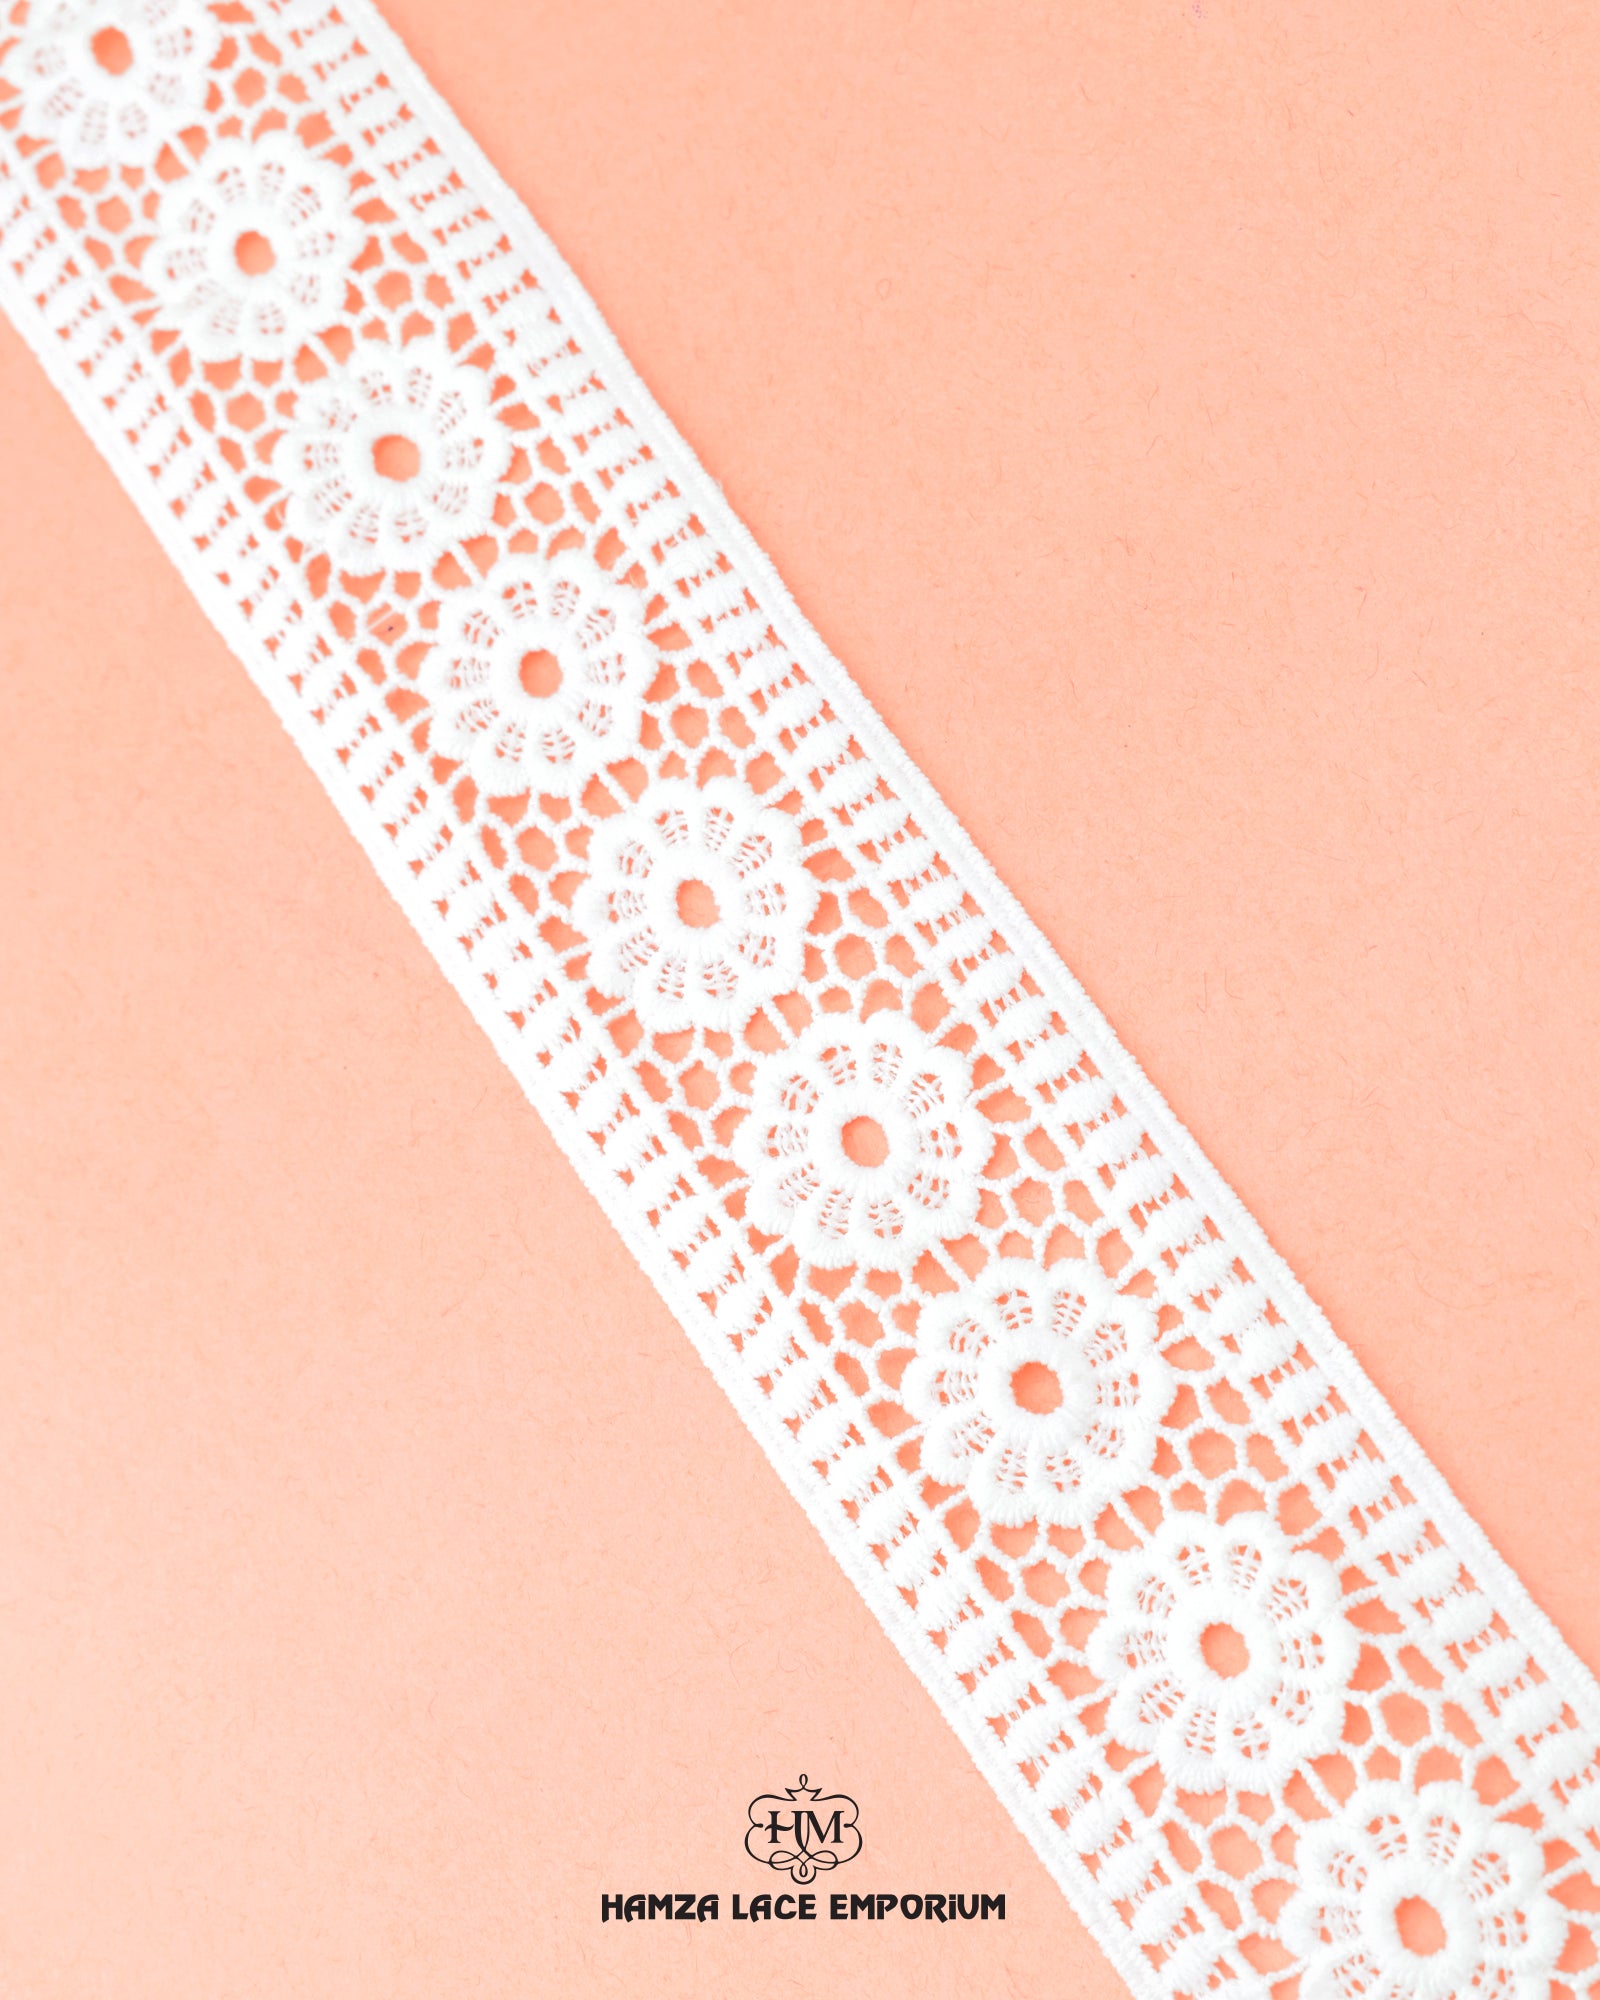 A white color 'Center Filling Lace 23327' is on a pink background